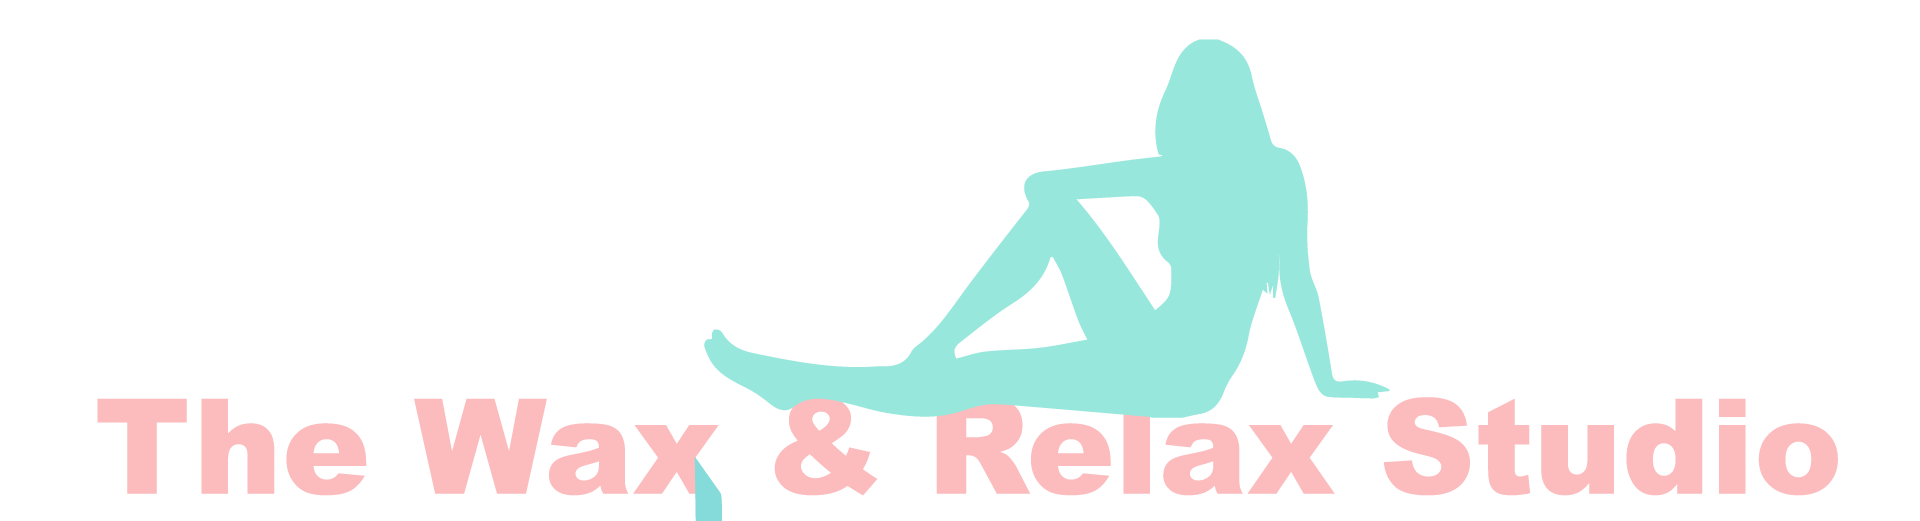 The Wax and Relax Studio Logo